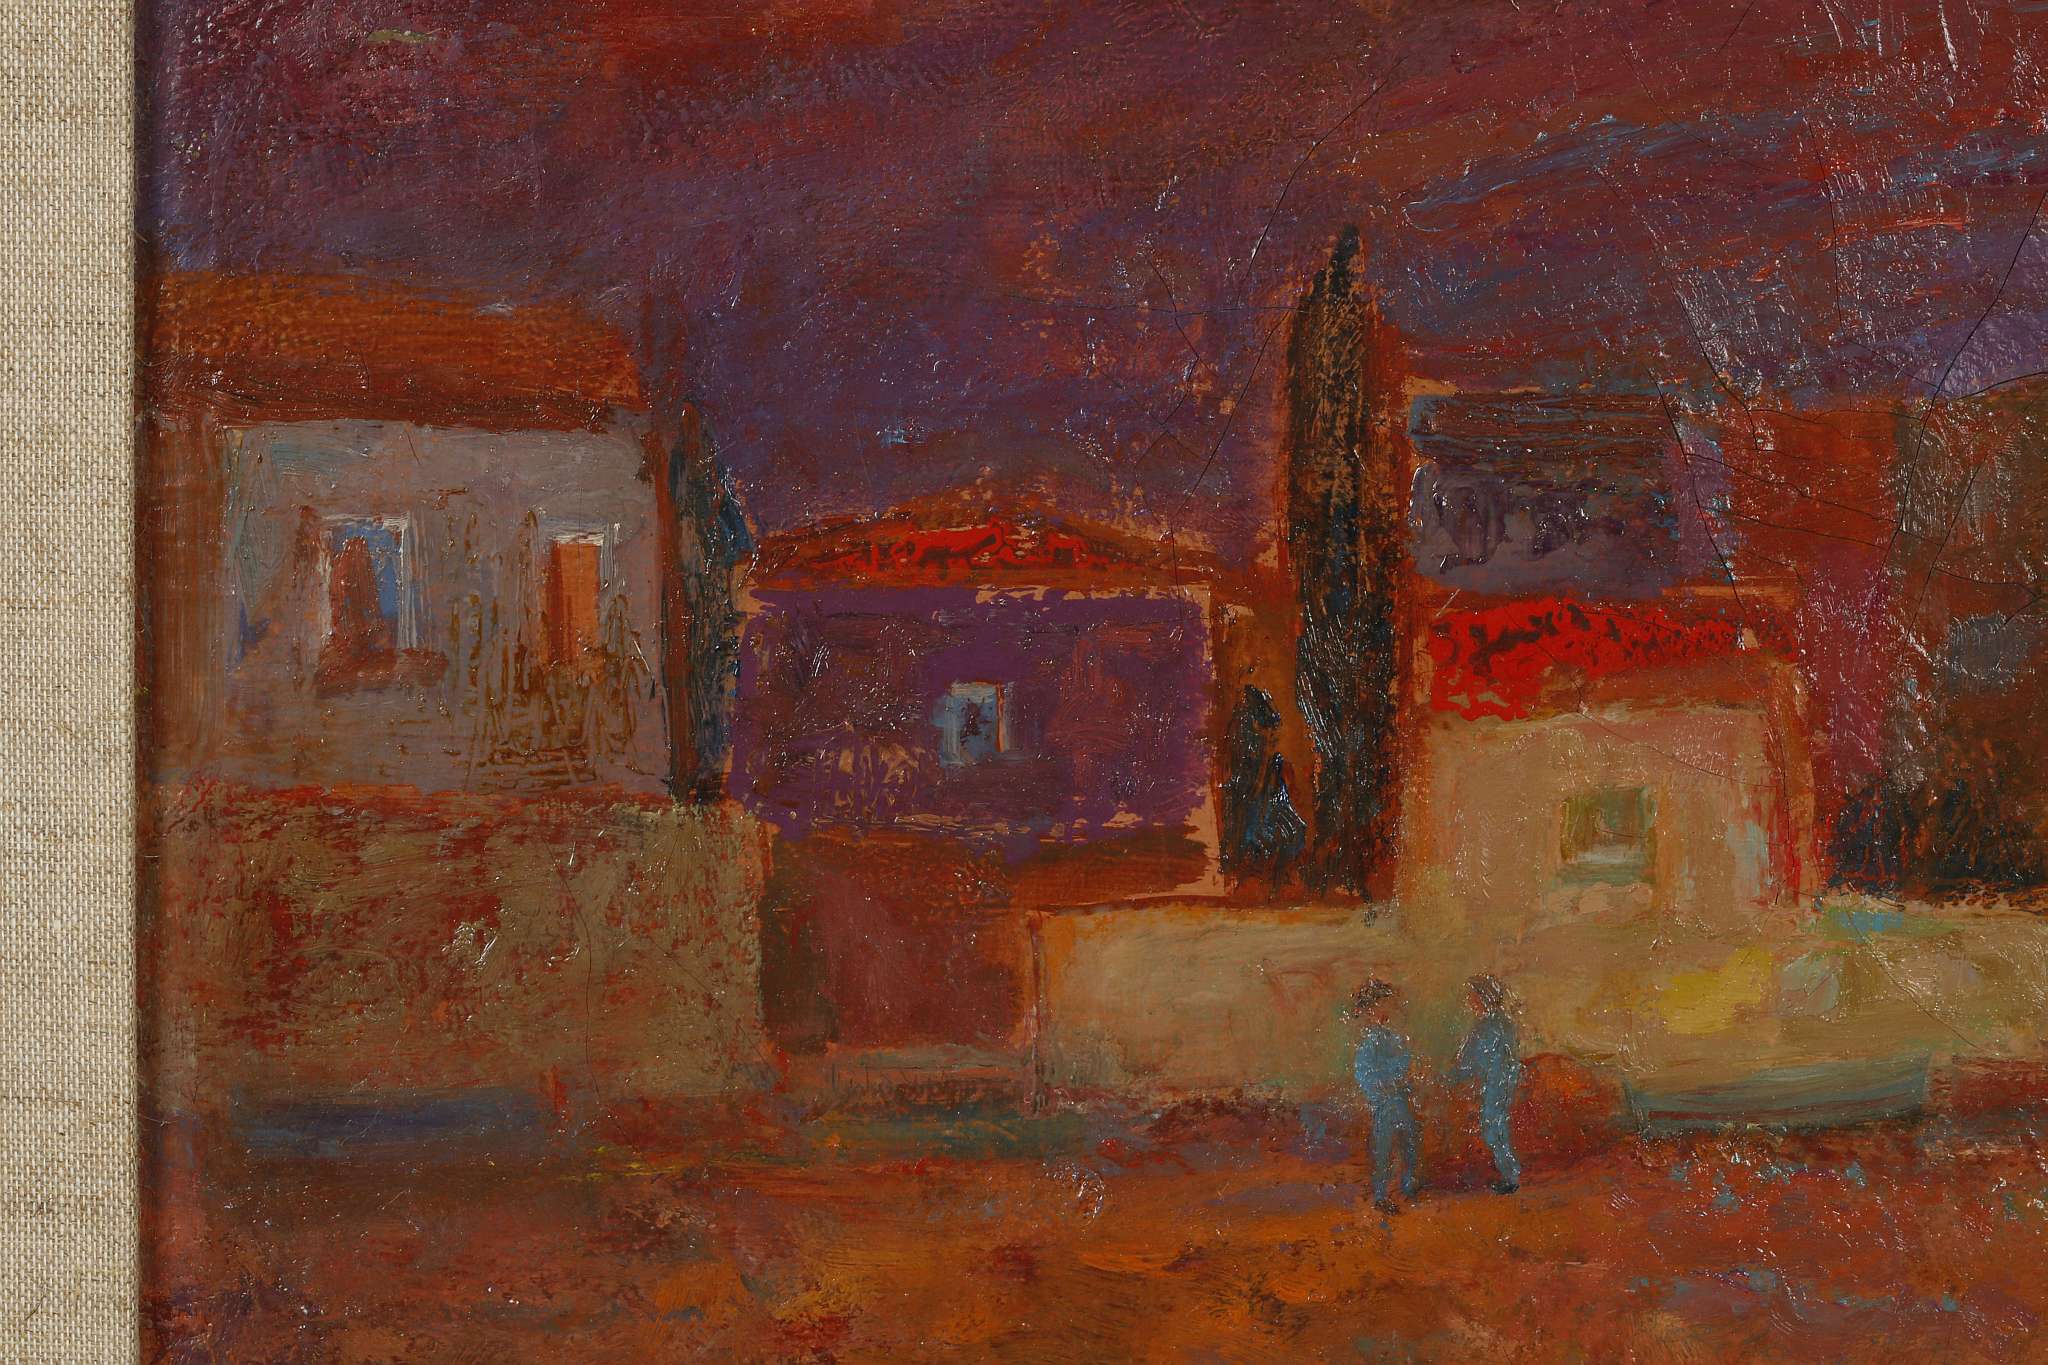 Muriel Rose R.B.A. R.O.I., 1923-2012, 'Beach, Spain', oil on canvas, signed lower right, label verso - Image 3 of 7